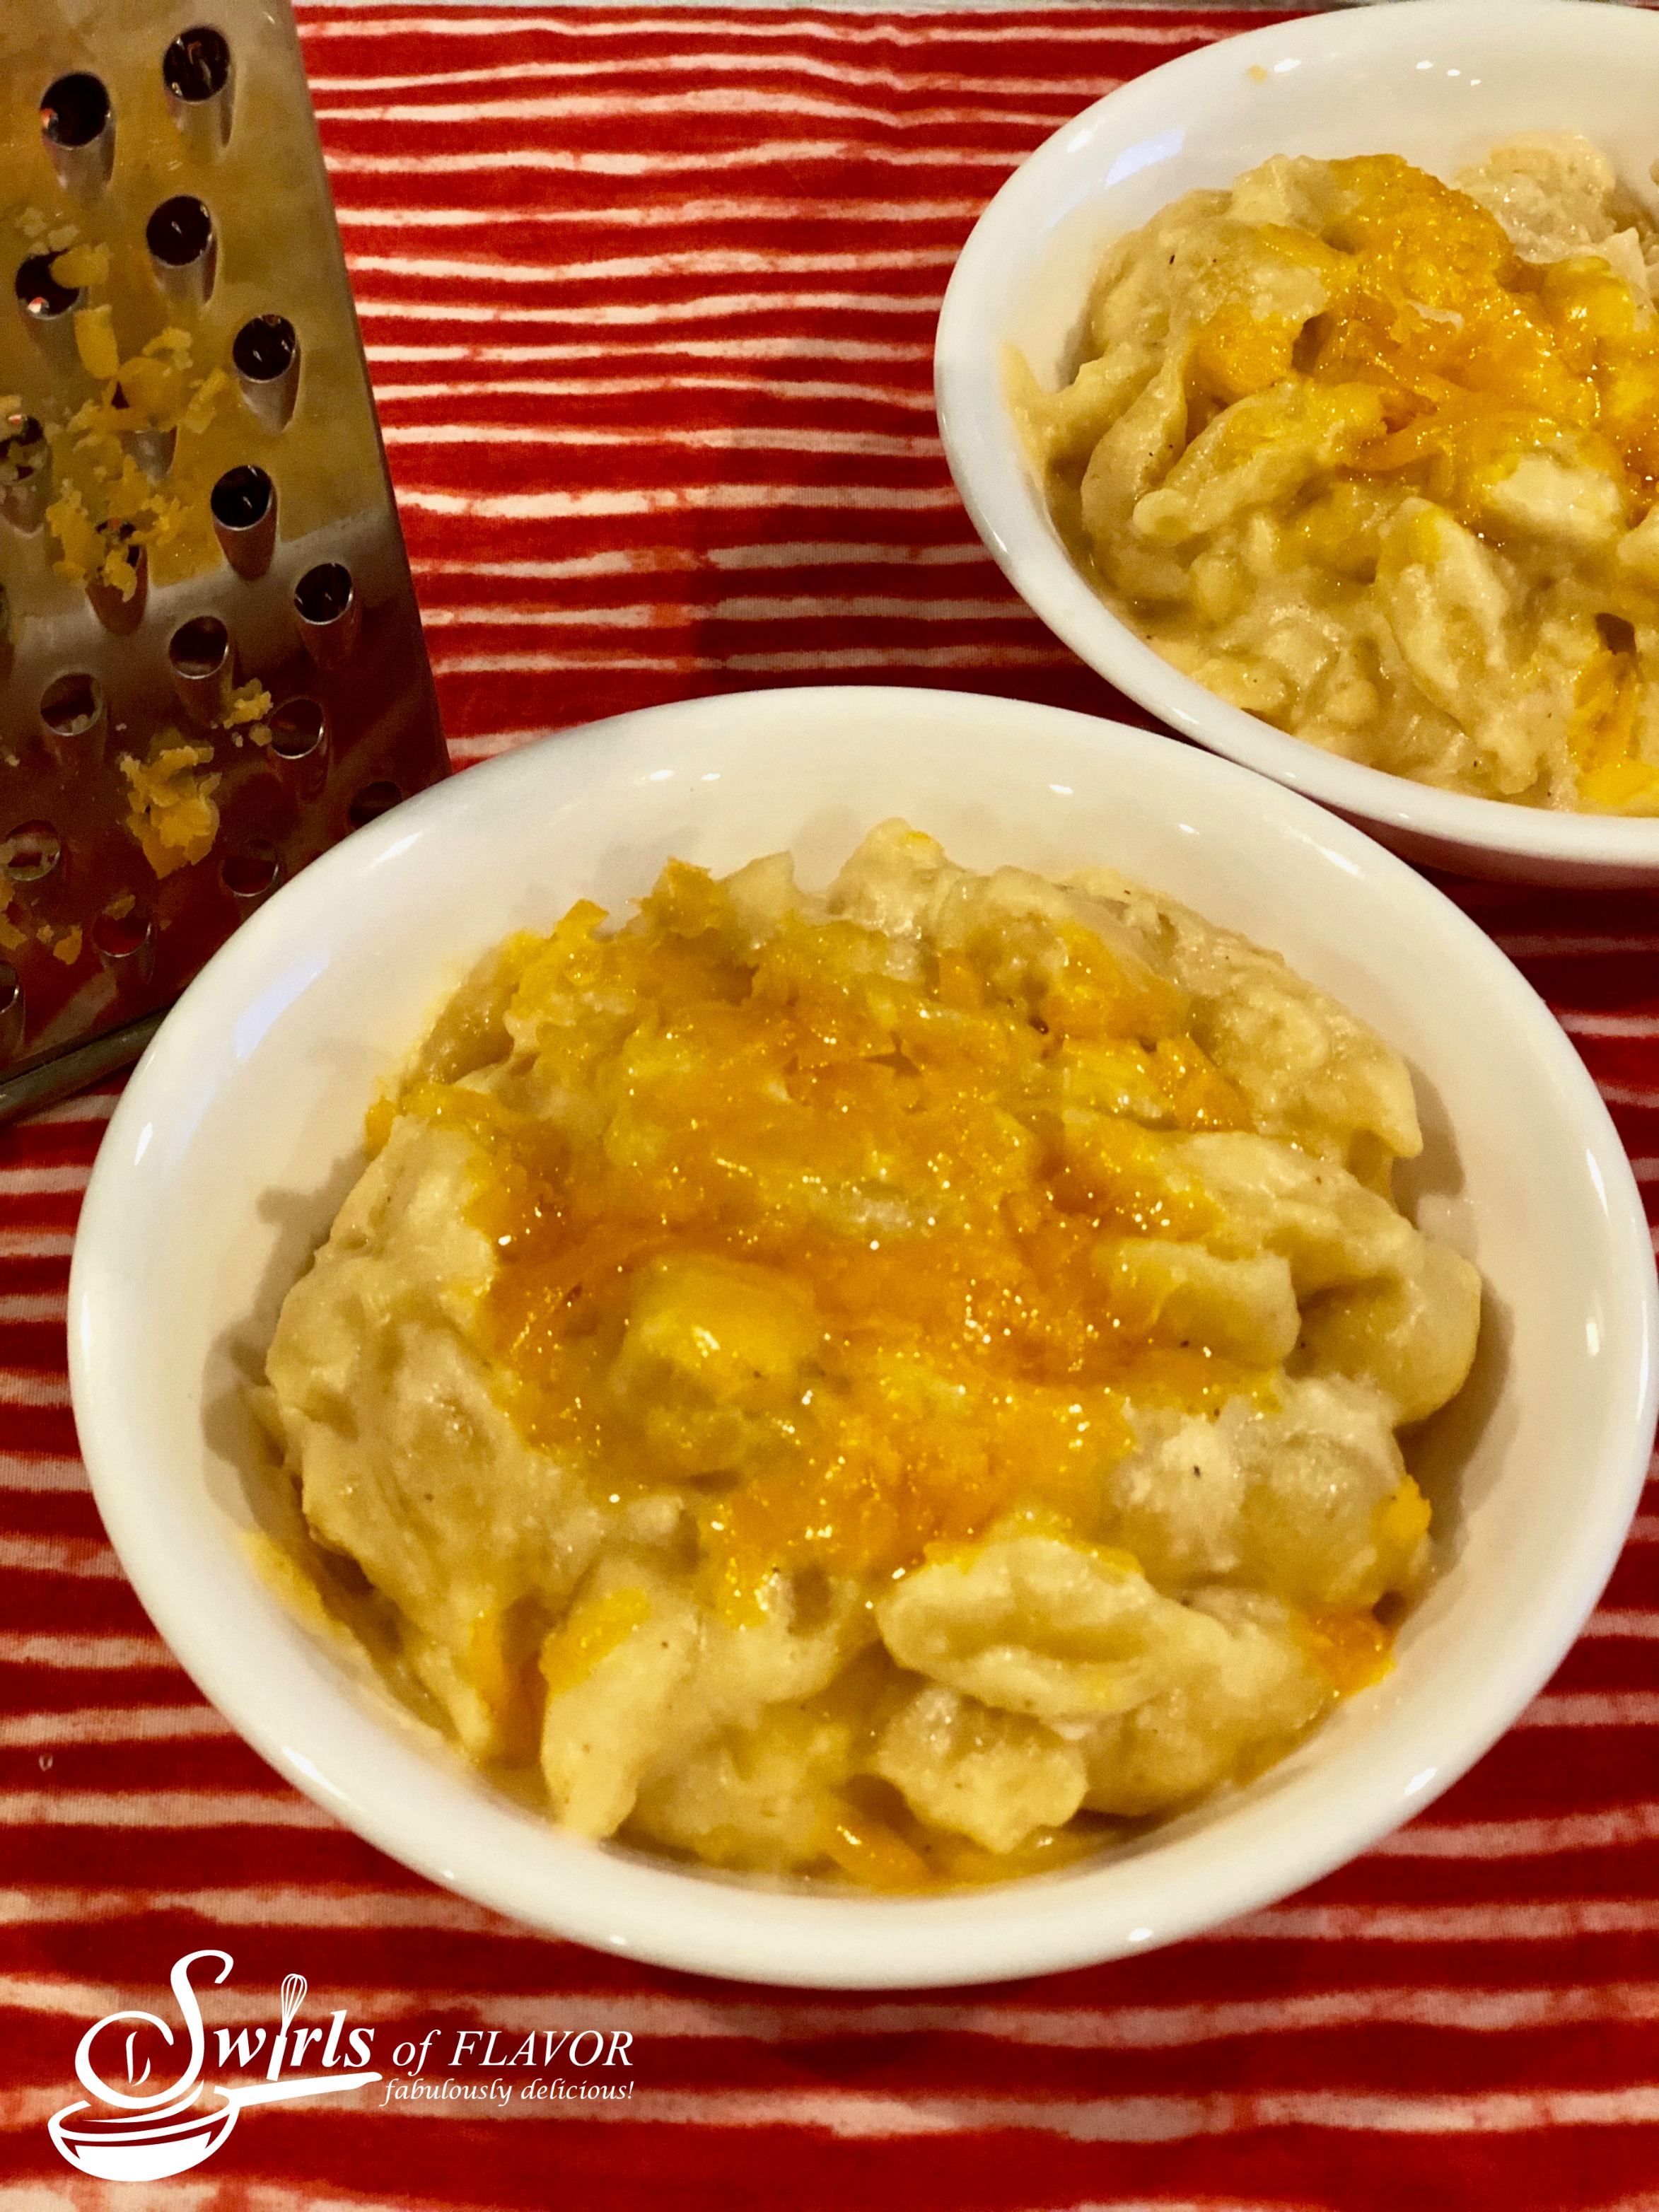 Bowls of macaroni and cheese with cheese grater